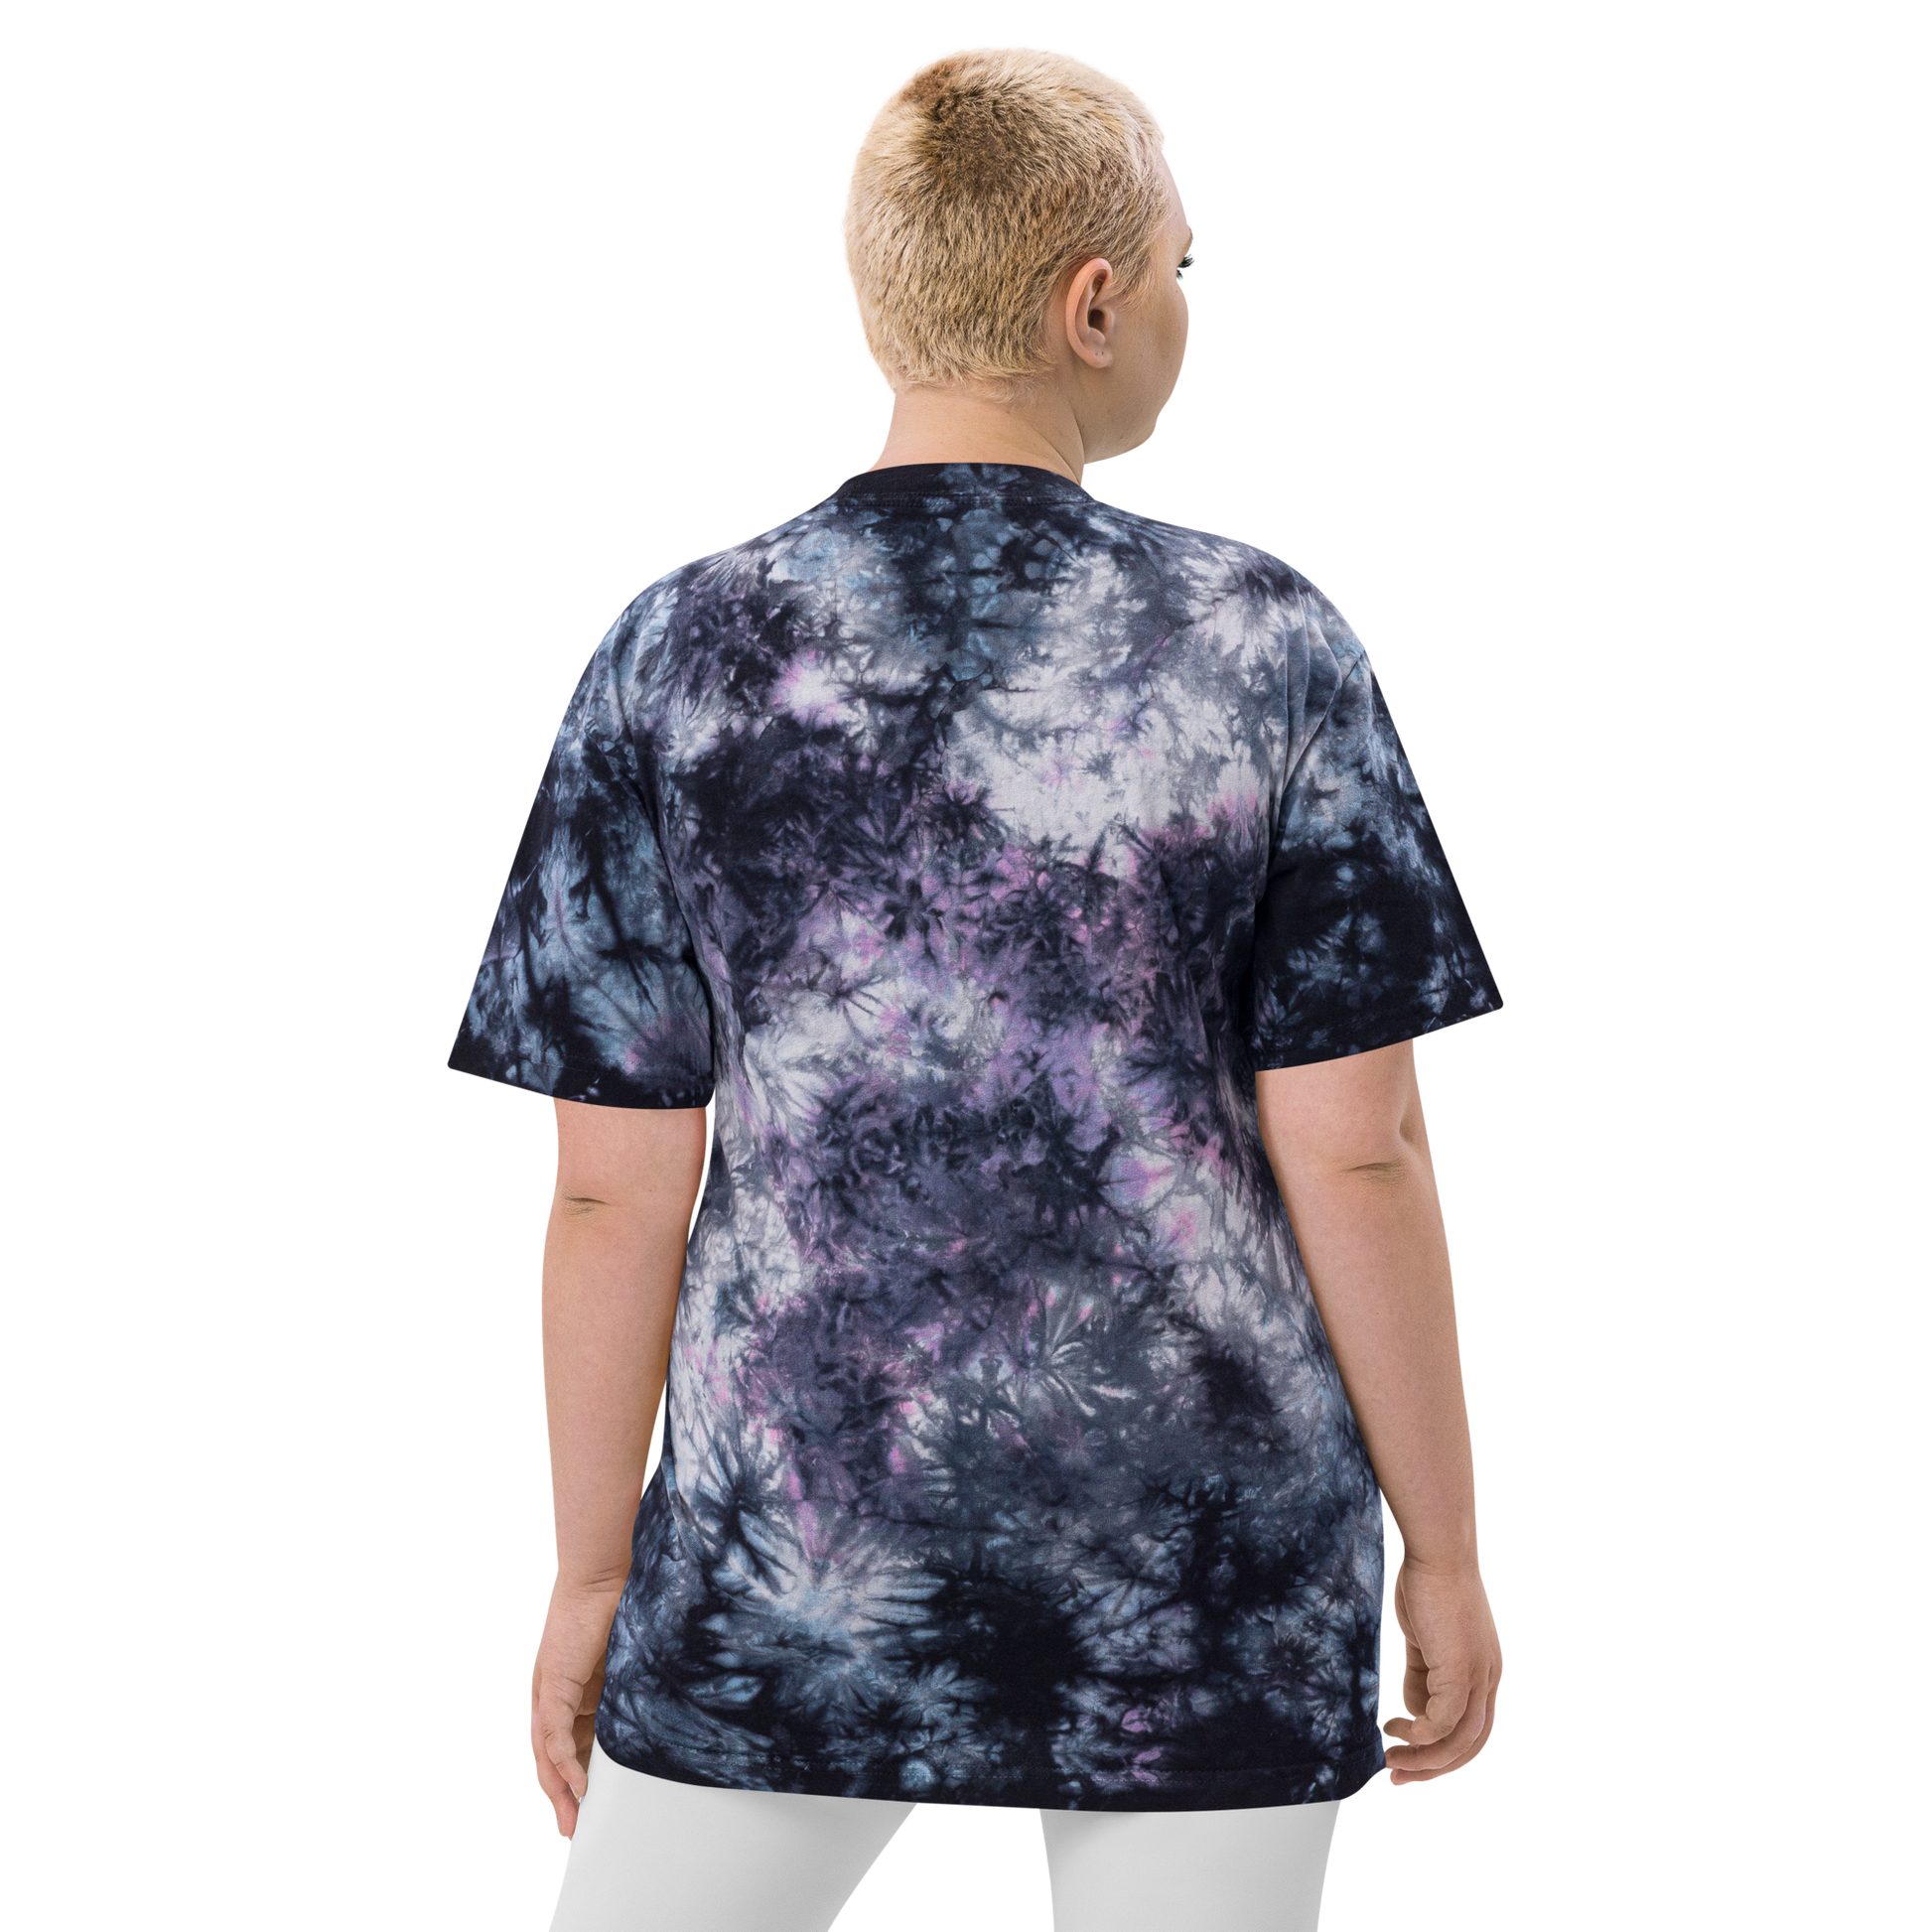 YHM Designs - YYZ Toronto Oversized Tie-Dye T-Shirt - Crossed-X Design with Airport Code and Vintage Propliner - White Embroidery - Image 06